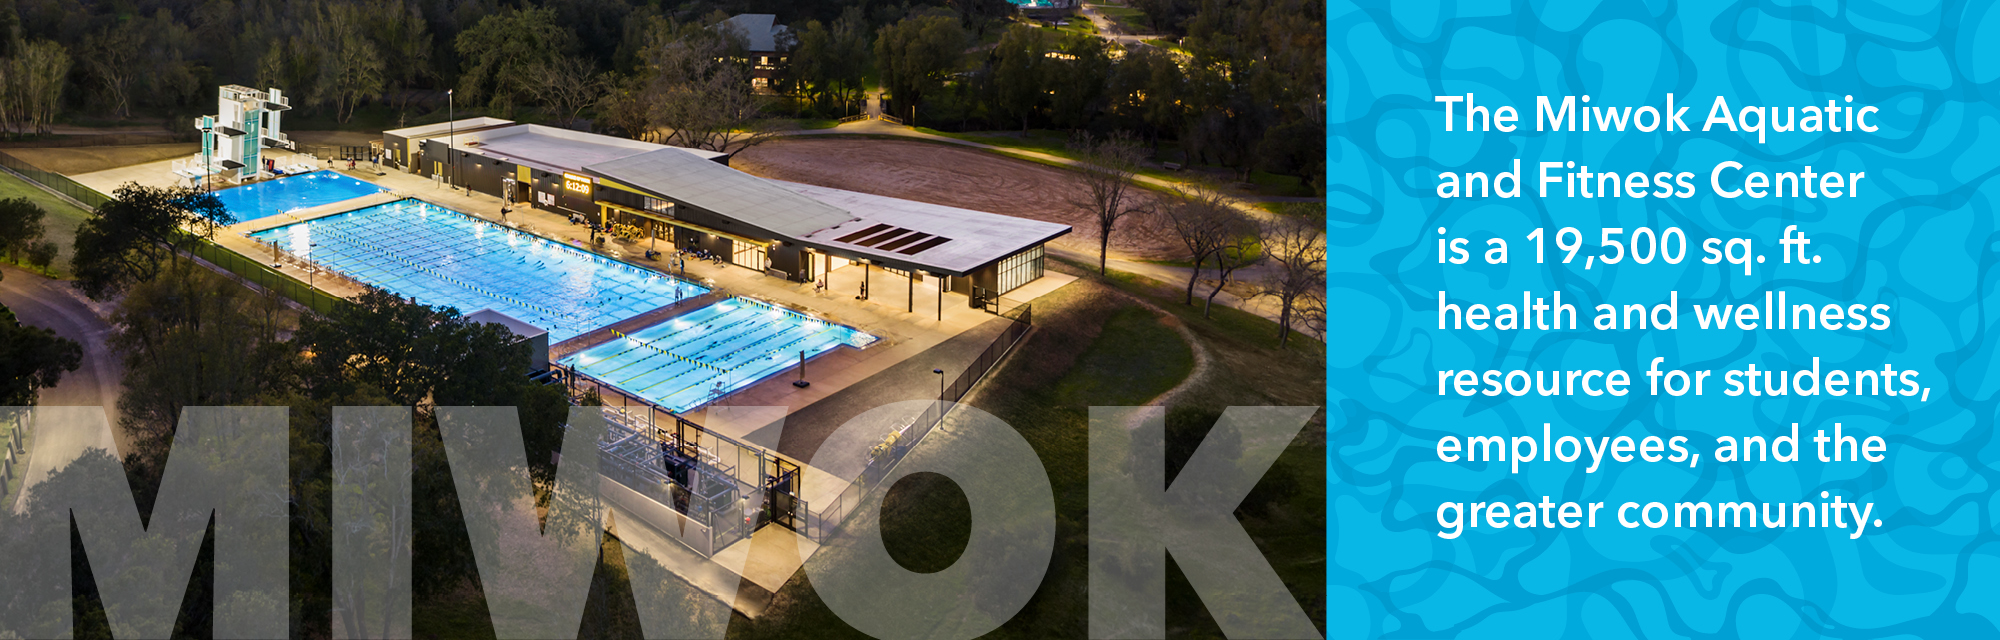 View of Miwok Aquatic and Fitness Center from above.